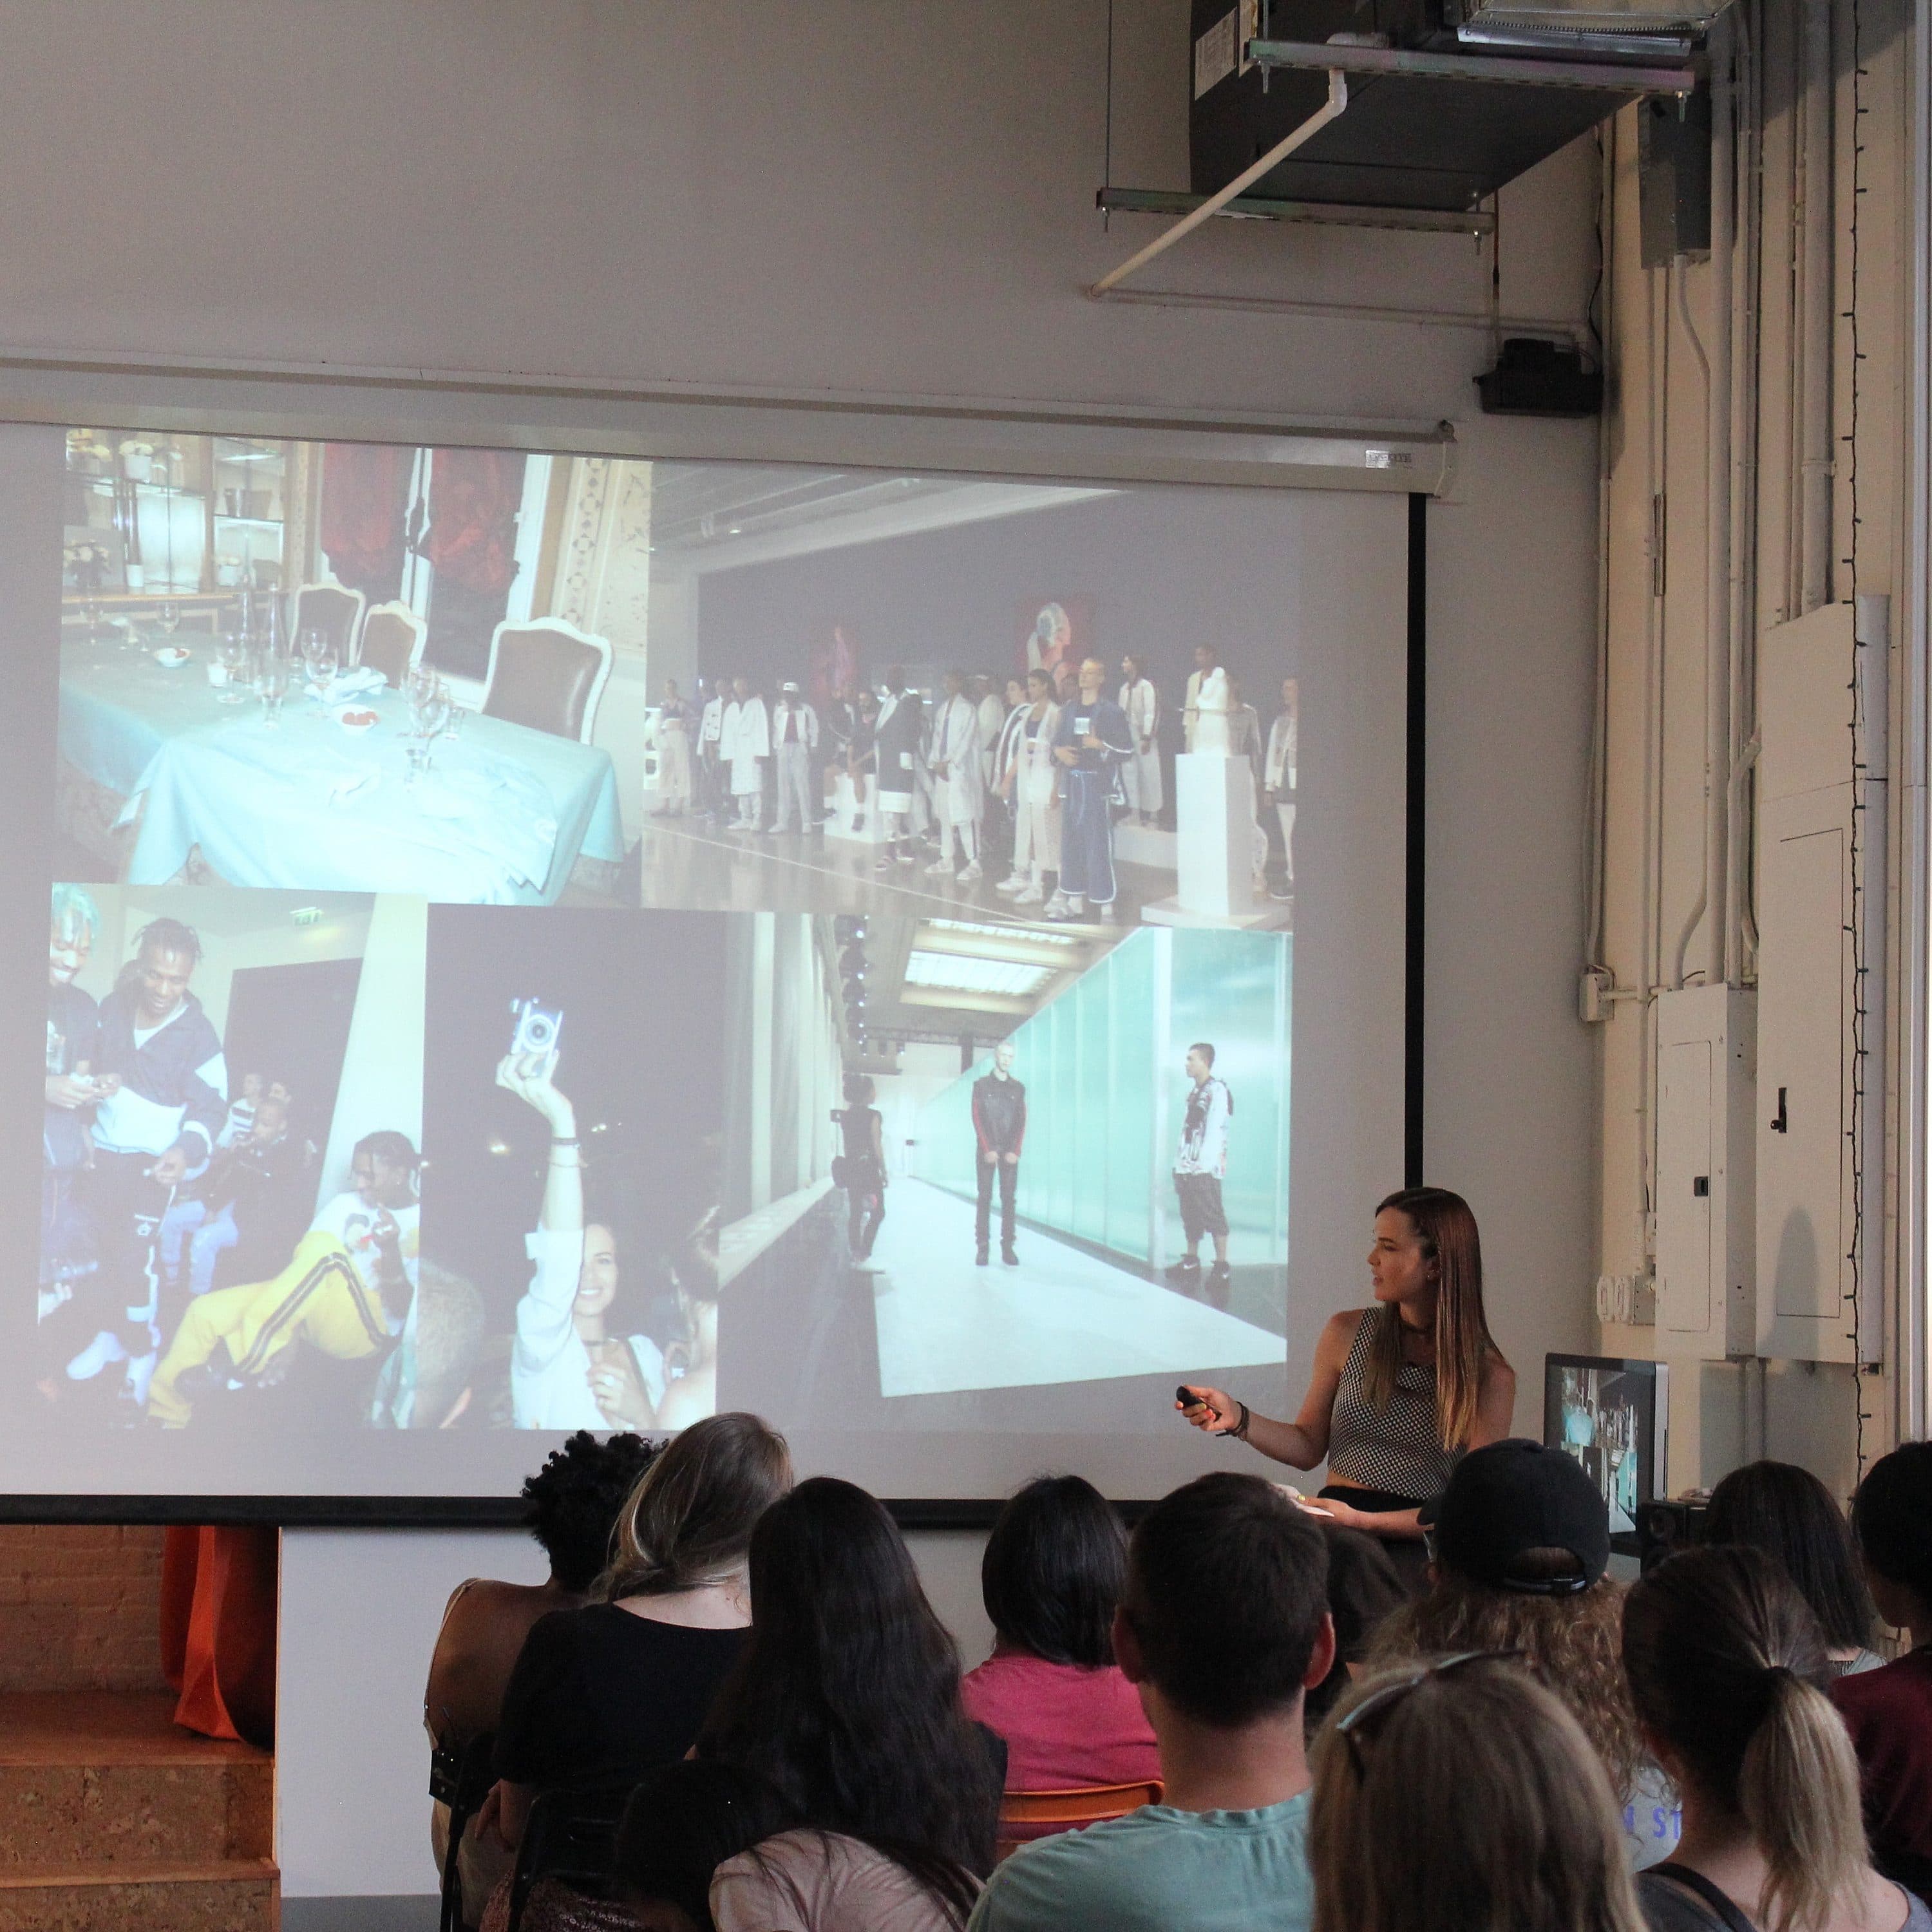 A group of people are seated in an art studio, listening to a woman giving a presentation. She stands next to a large projection screen displaying several fashion and art images. The room has artwork on the walls and various materials and equipment around.